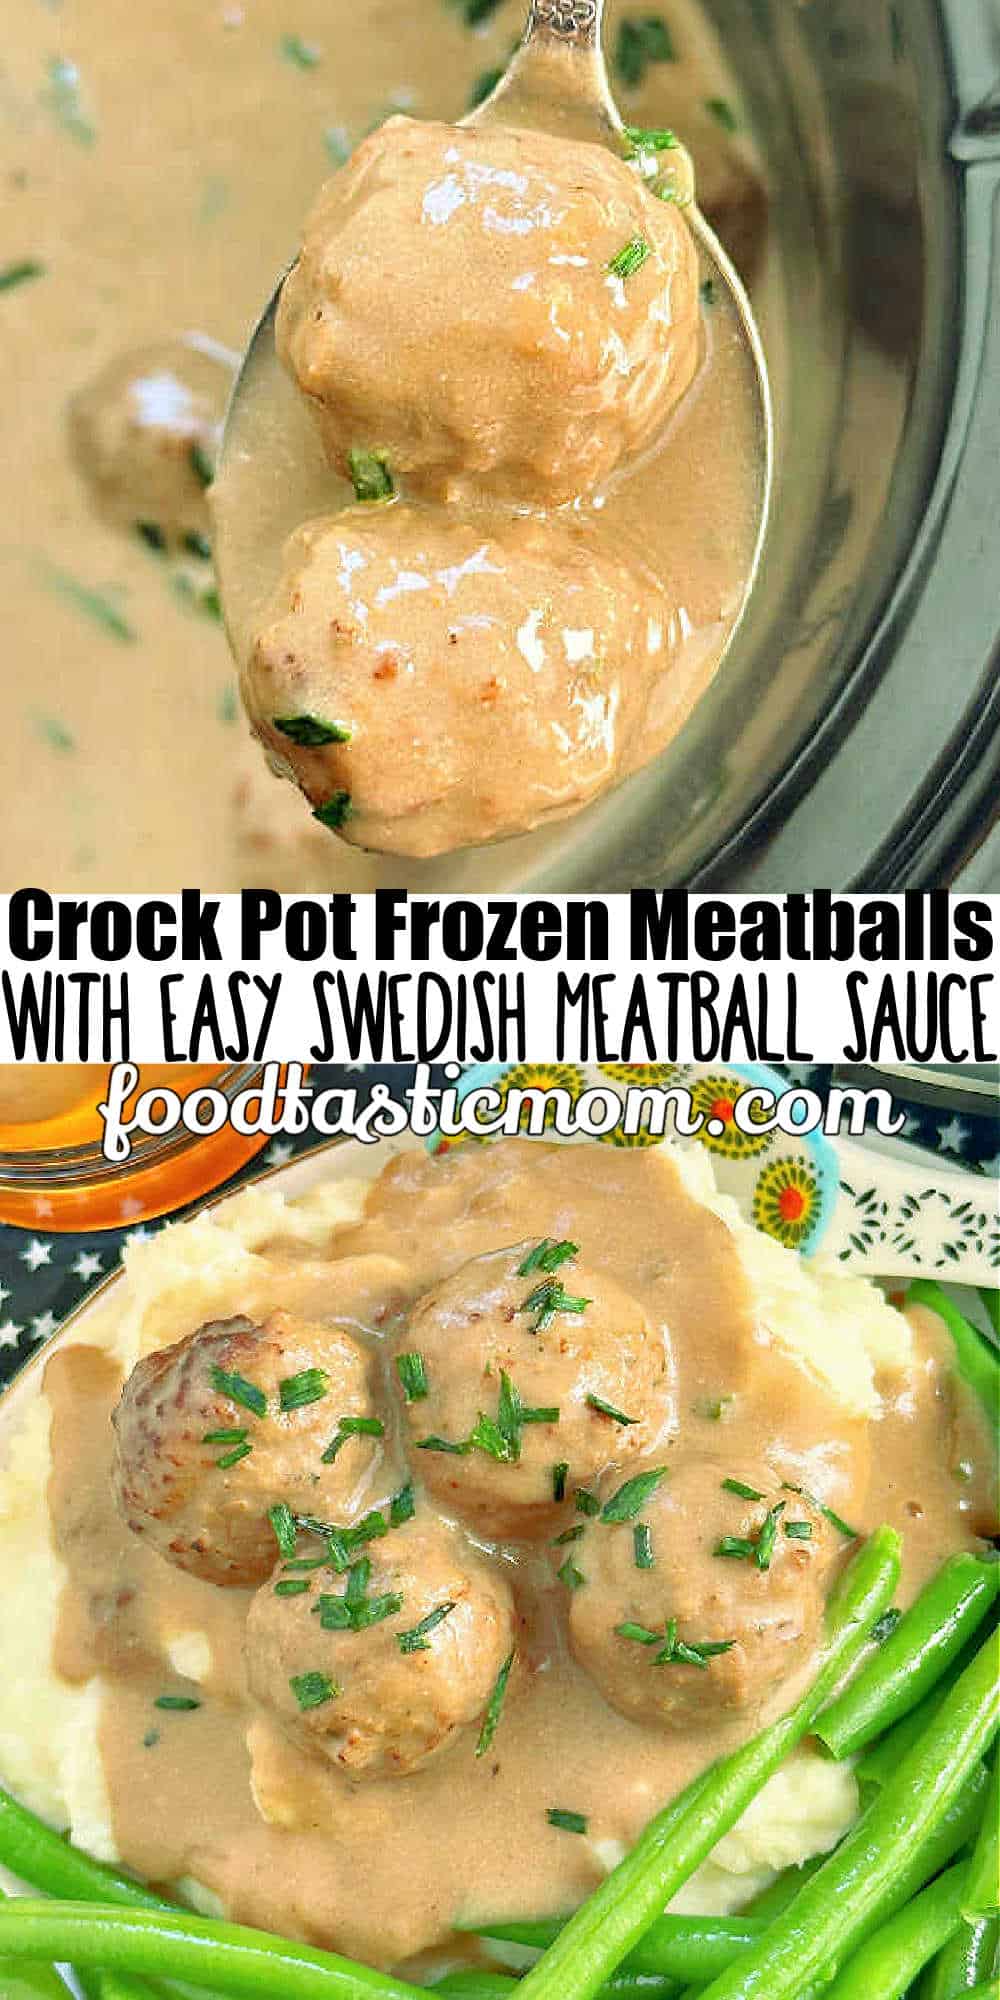 Learn how to cook meatballs from frozen in your Crock Pot, complete with a delicious Swedish meatball gravy made with my microwave roux. via @foodtasticmom